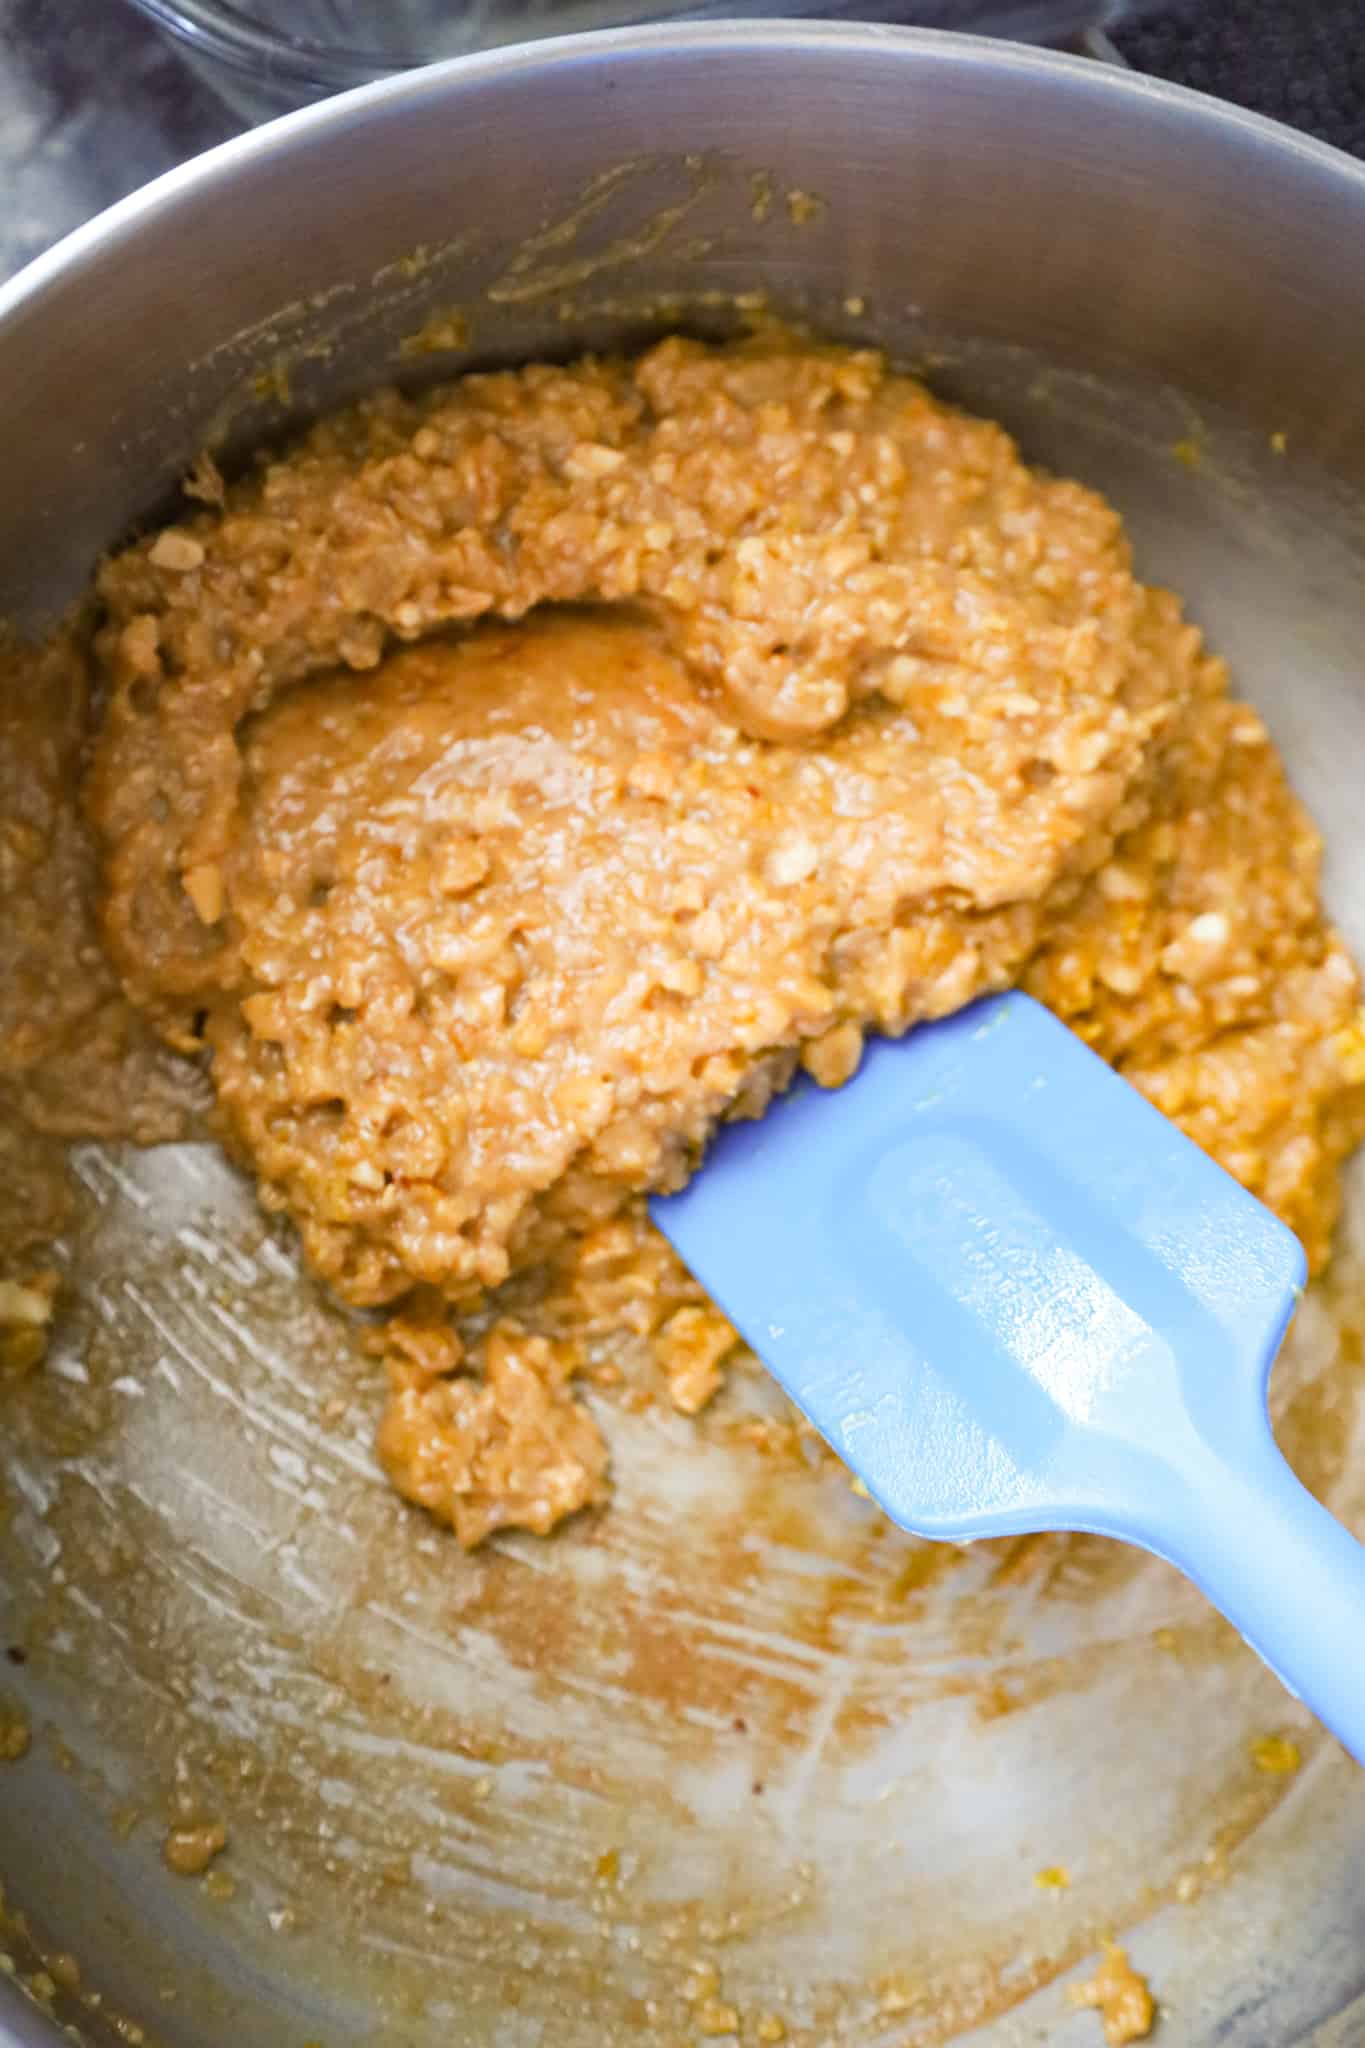 cornflake, peanut butter and corn syrup mixture in a pot